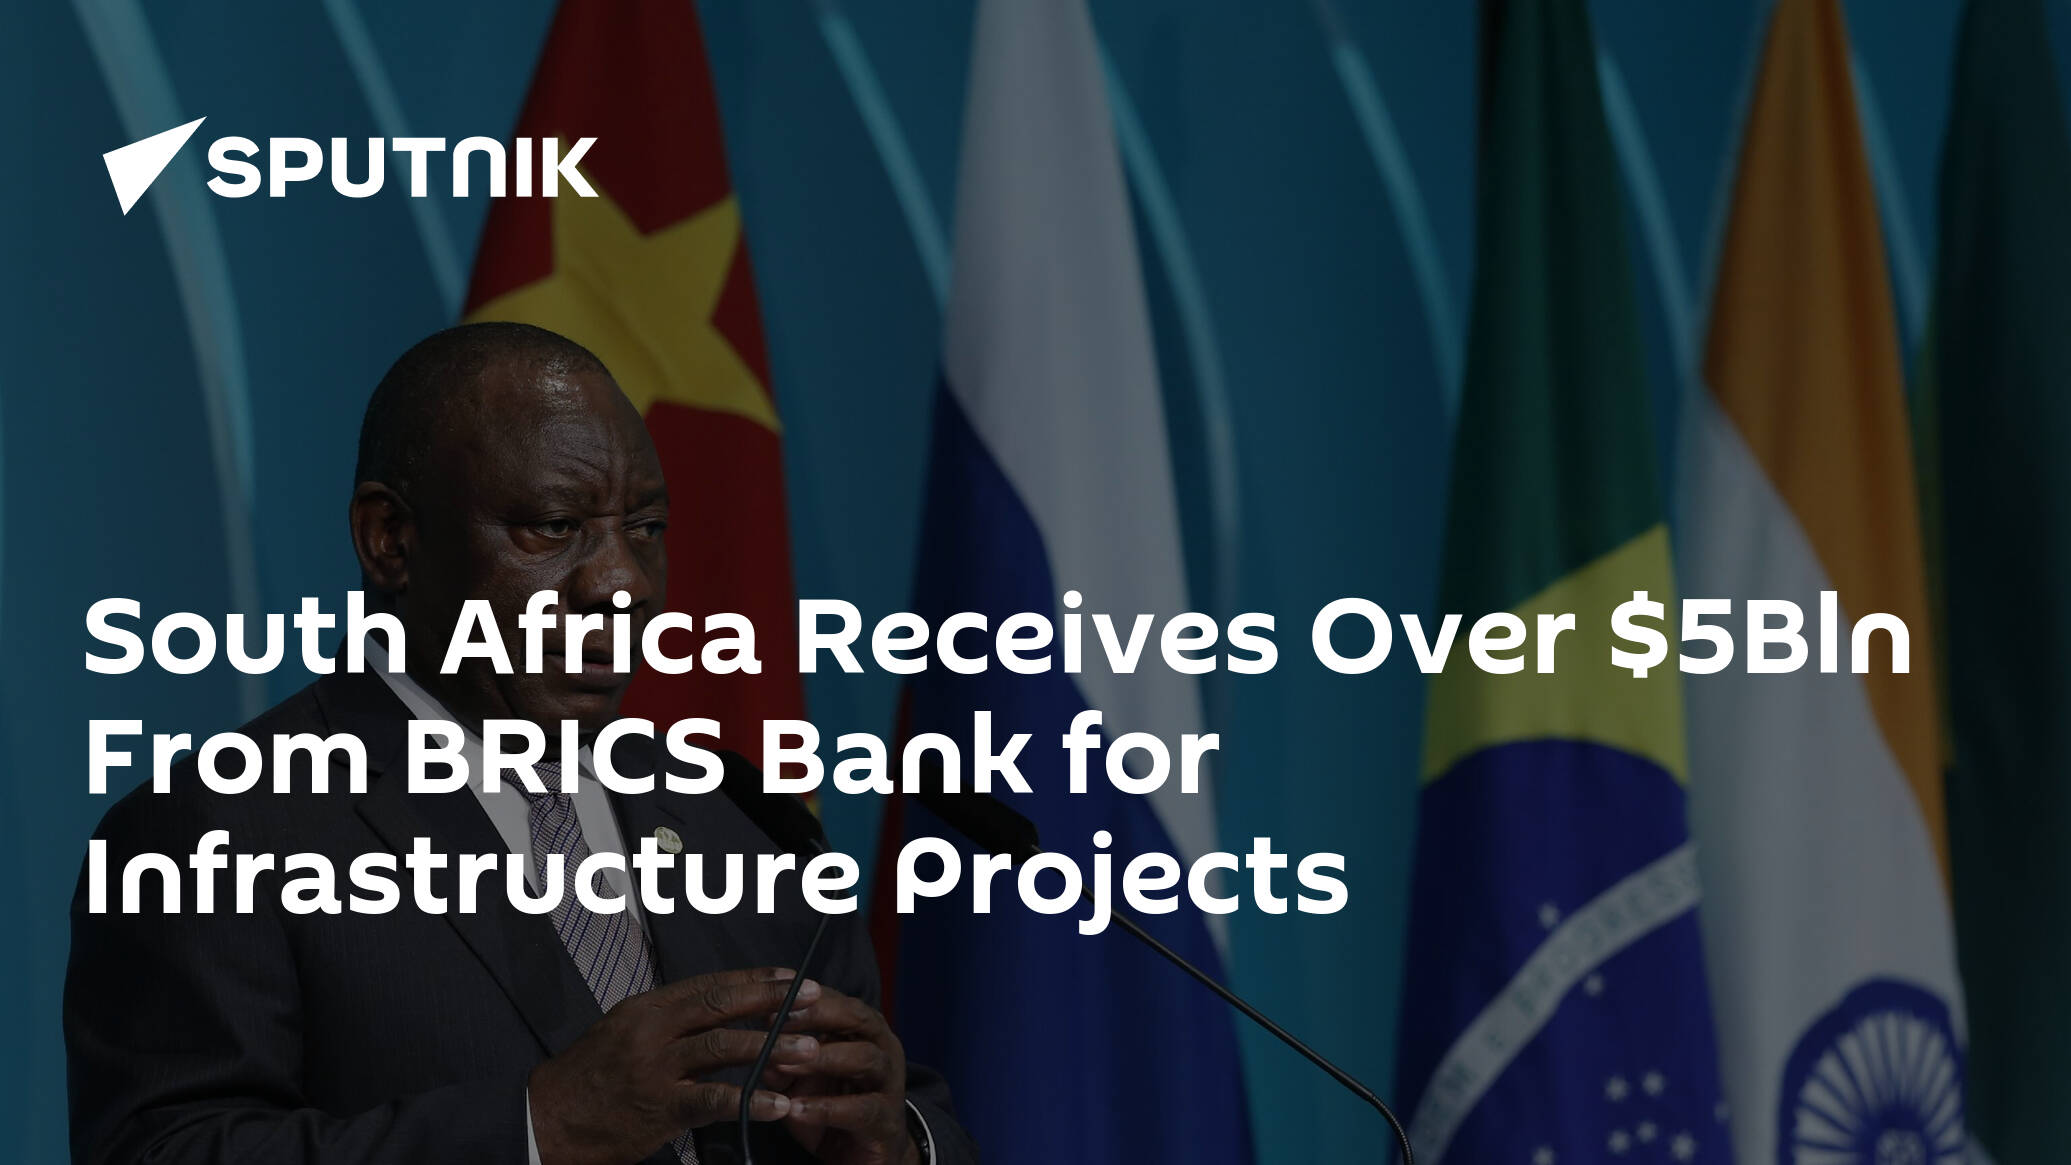 South Africa Receives Over Bln From BRICS Bank for Infrastructure Projects